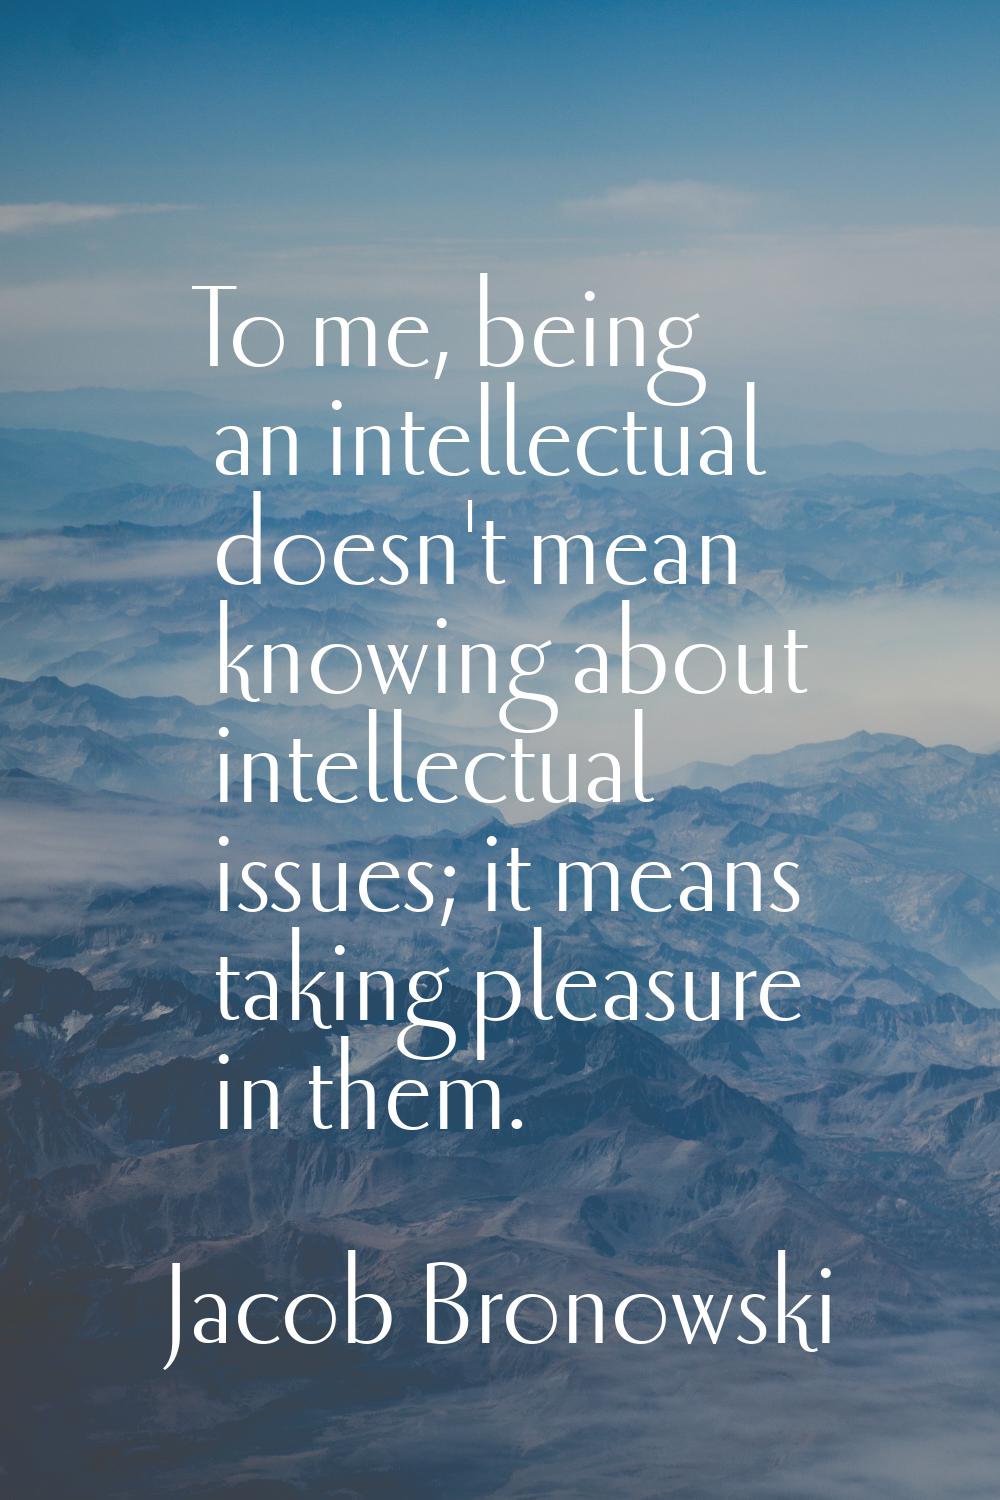 To me, being an intellectual doesn't mean knowing about intellectual issues; it means taking pleasu